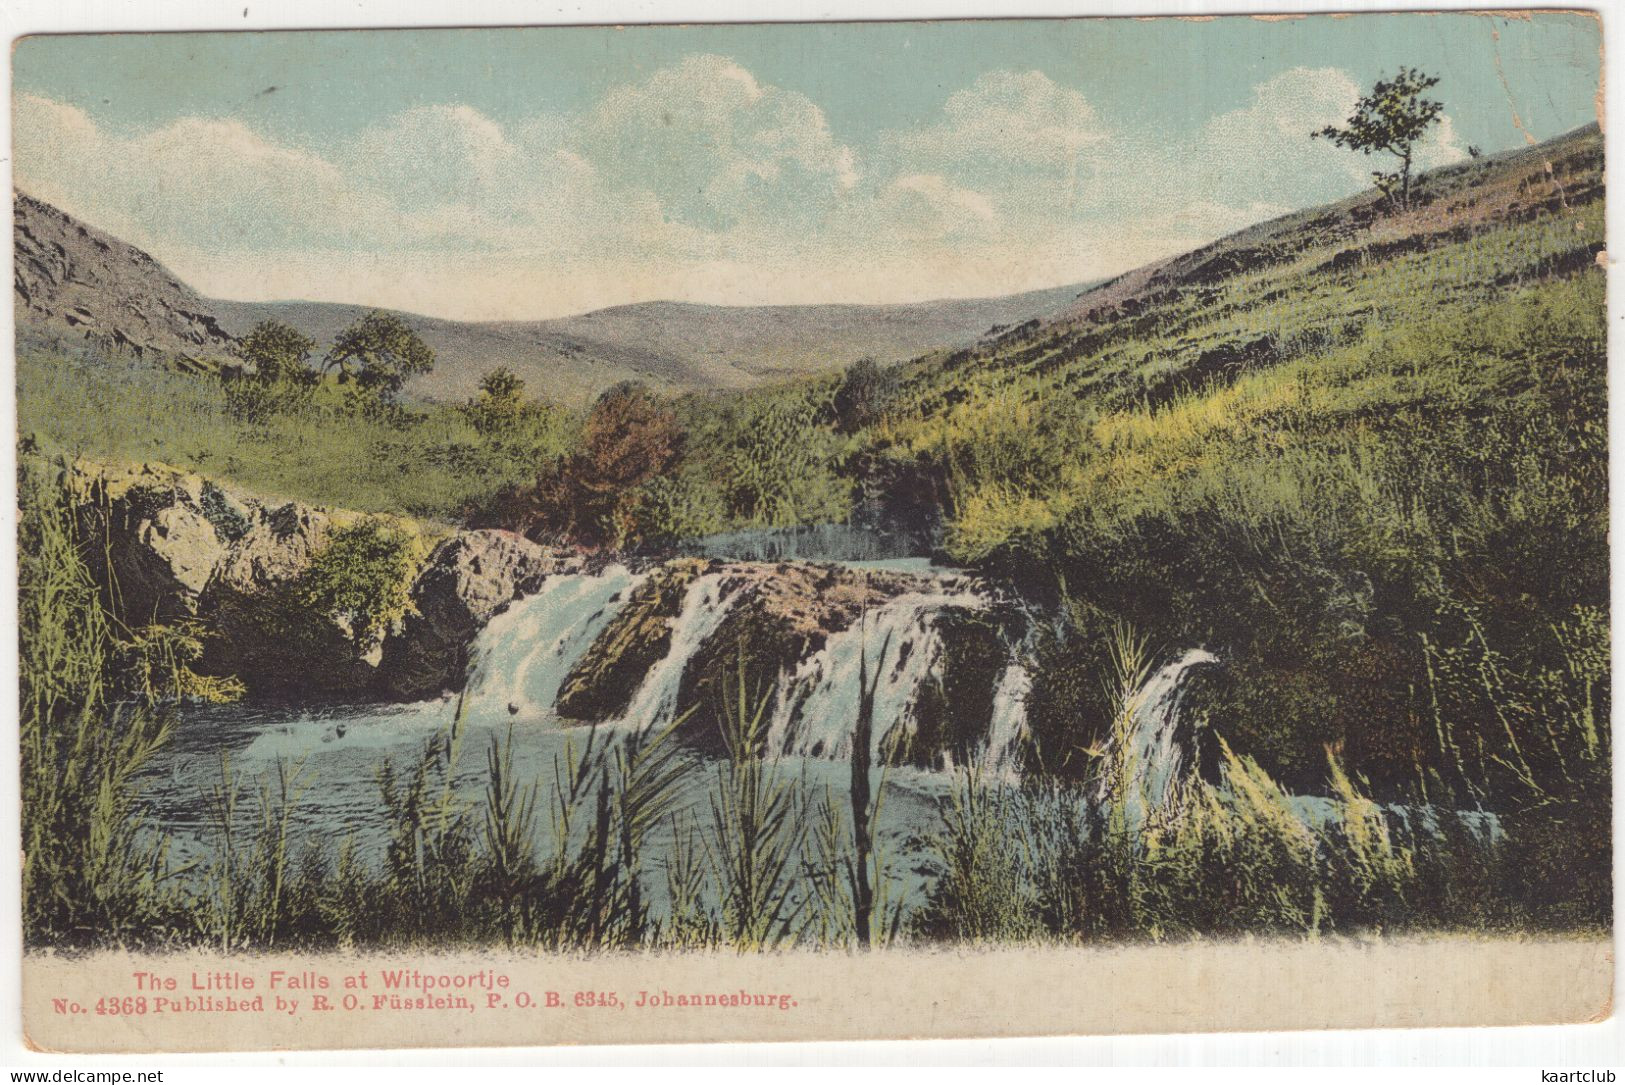 The Little Falls At Witpoortje - (South-Africa) - No. 4368 Publ.: R.O. Füsslein, Johannesburg - South Africa